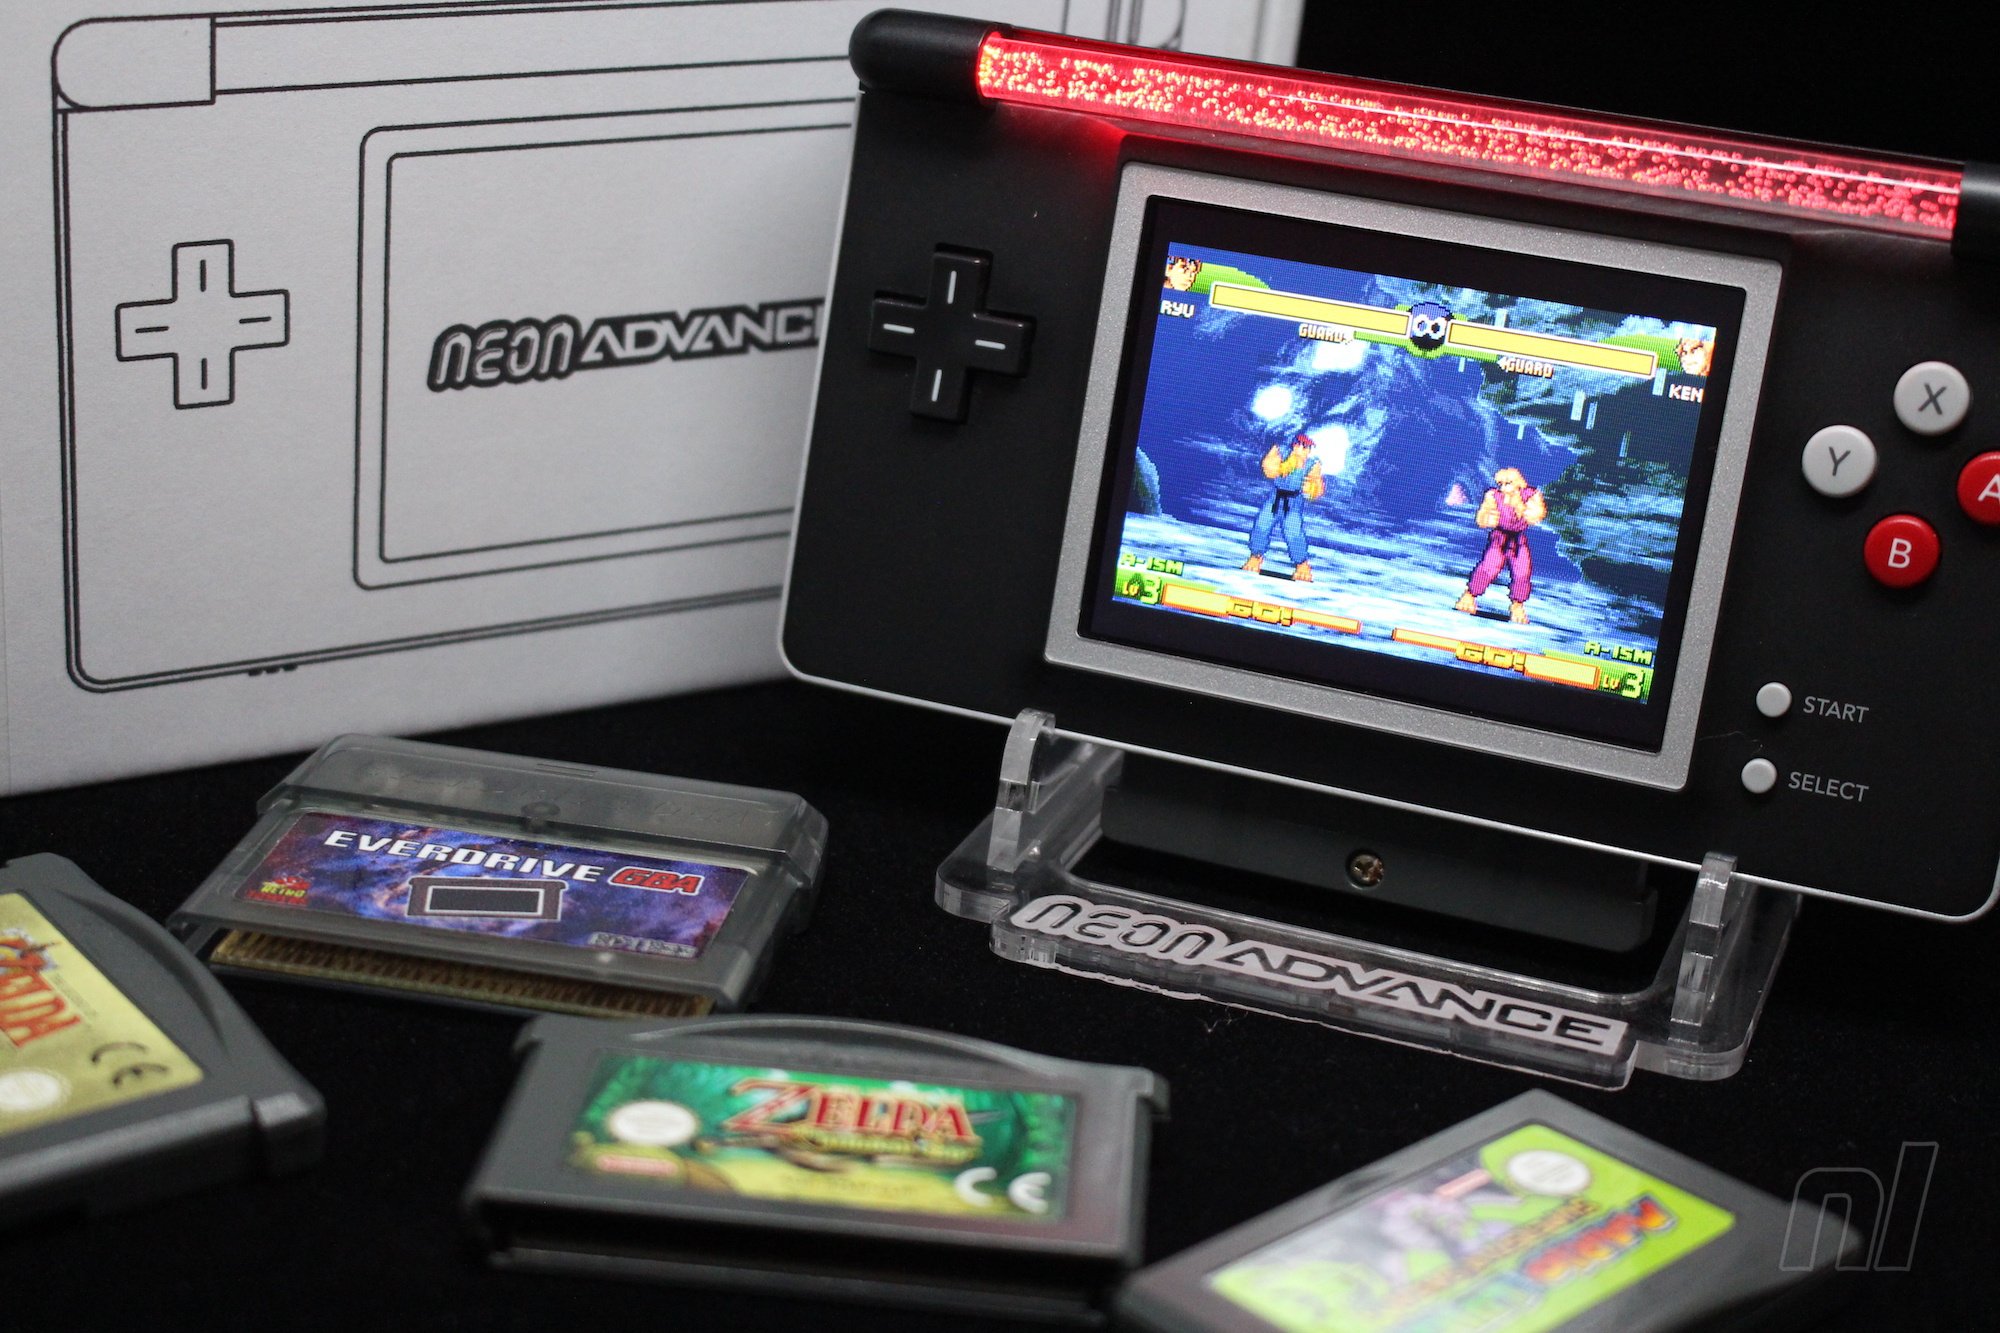 Custom built Fully Modded Backlit 101 Screen and Rechargeable Battery Link to the PastFour Swords Gameboy Advance